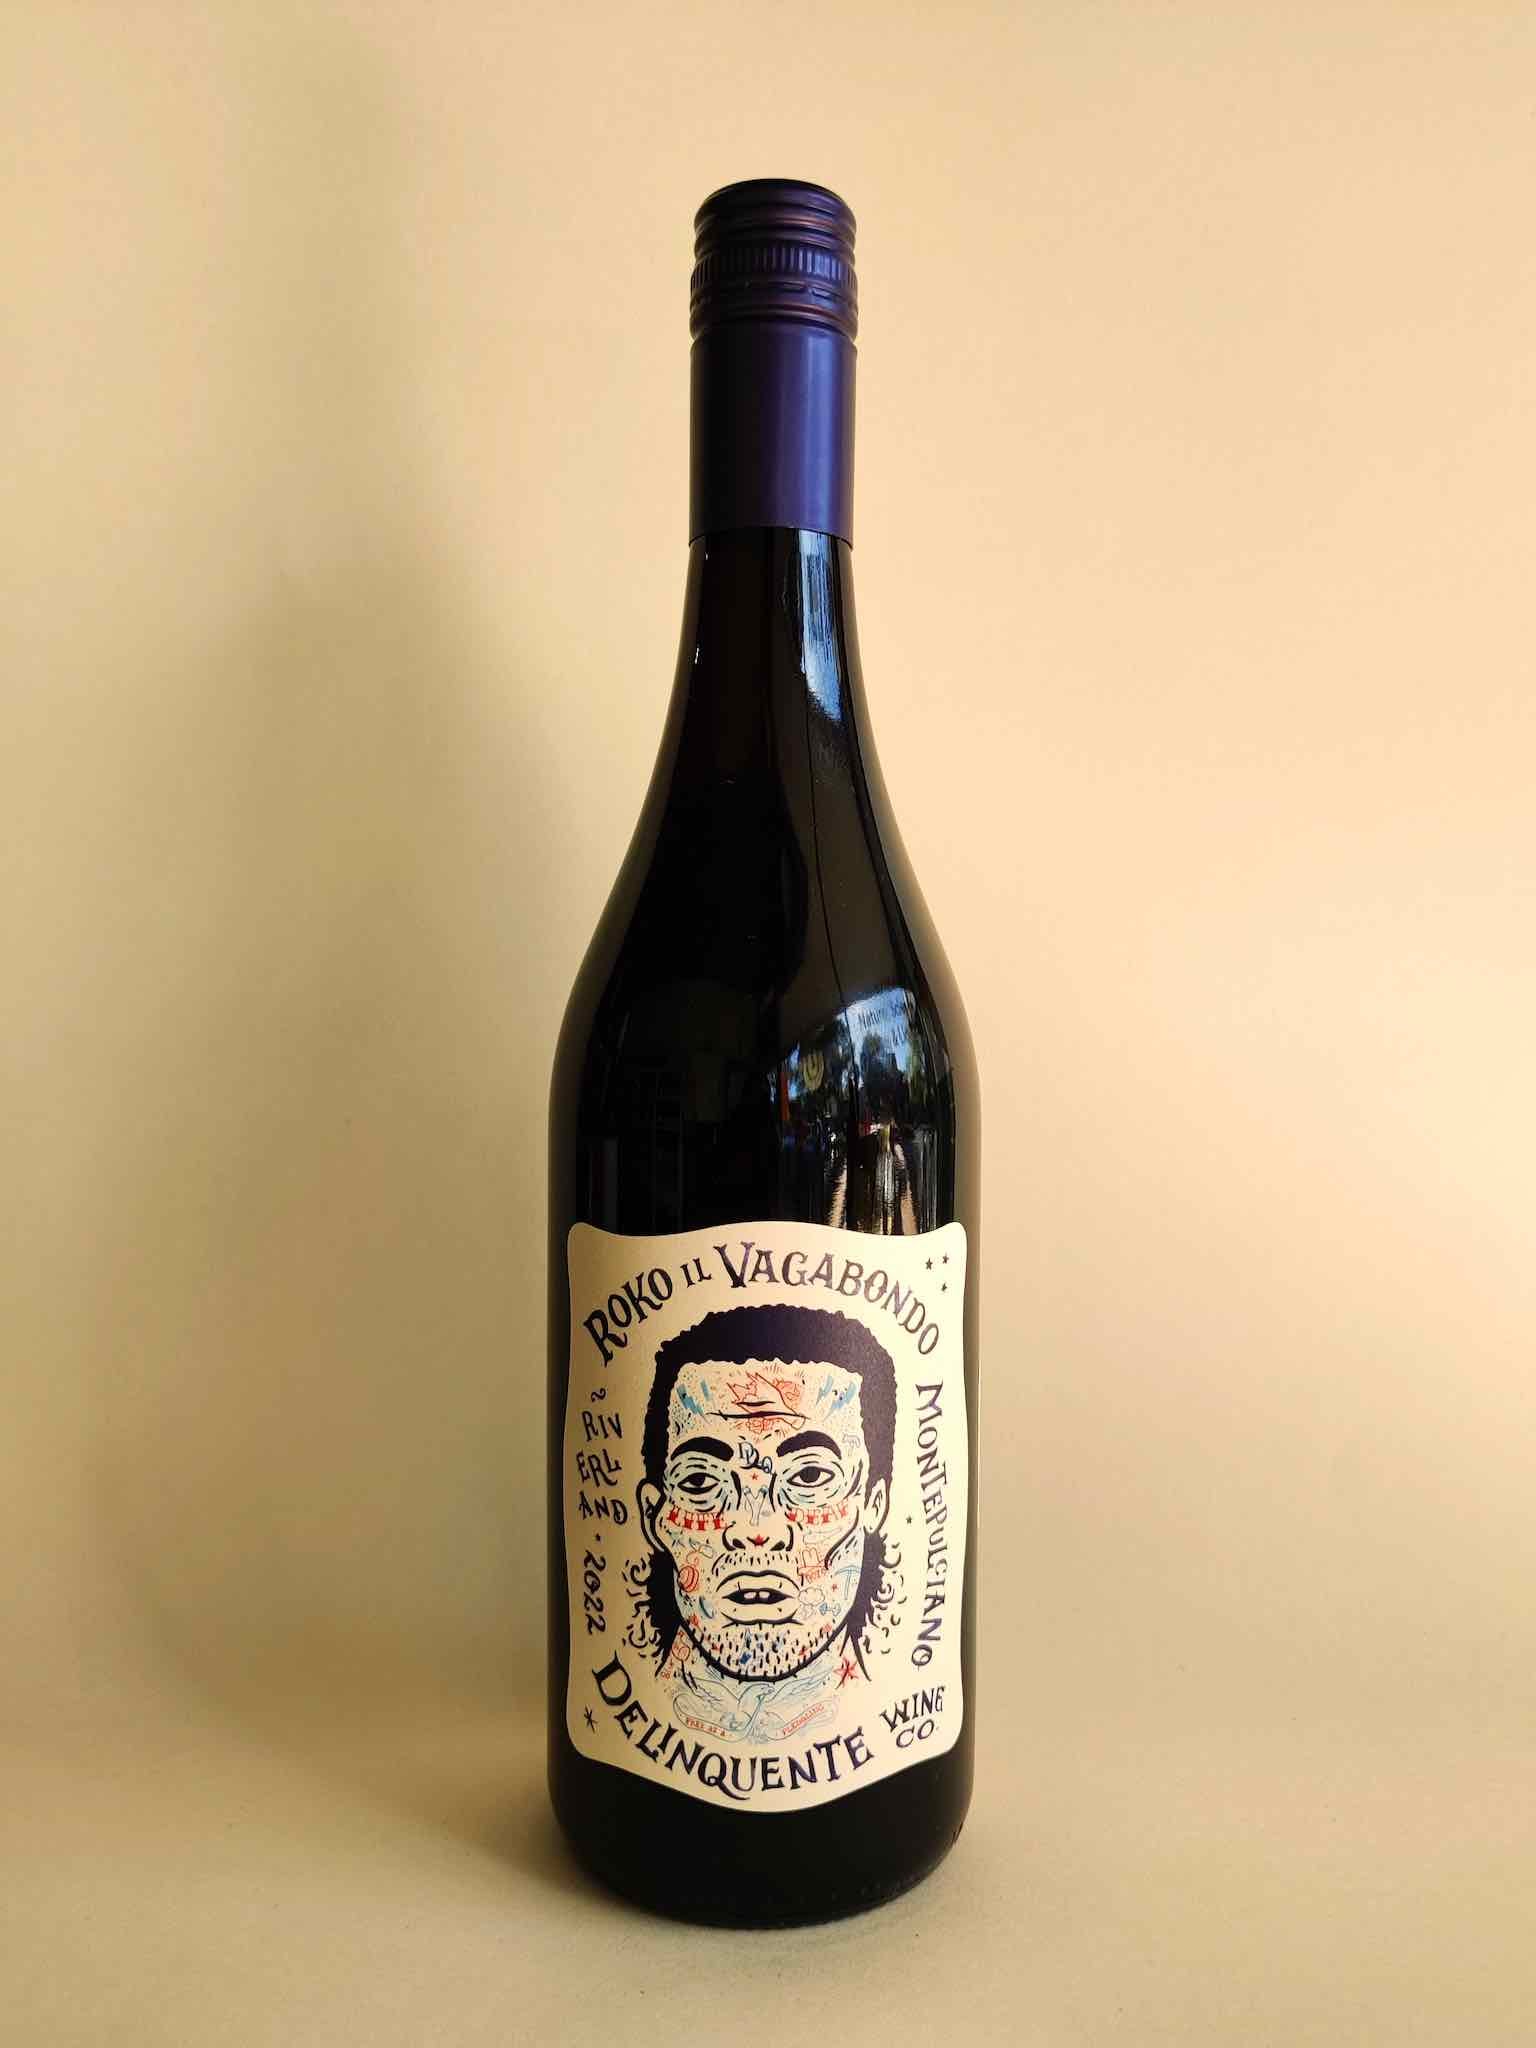 A bottle of Delinquente Roko Montepulciano red wine from Riverland, South Australia. 